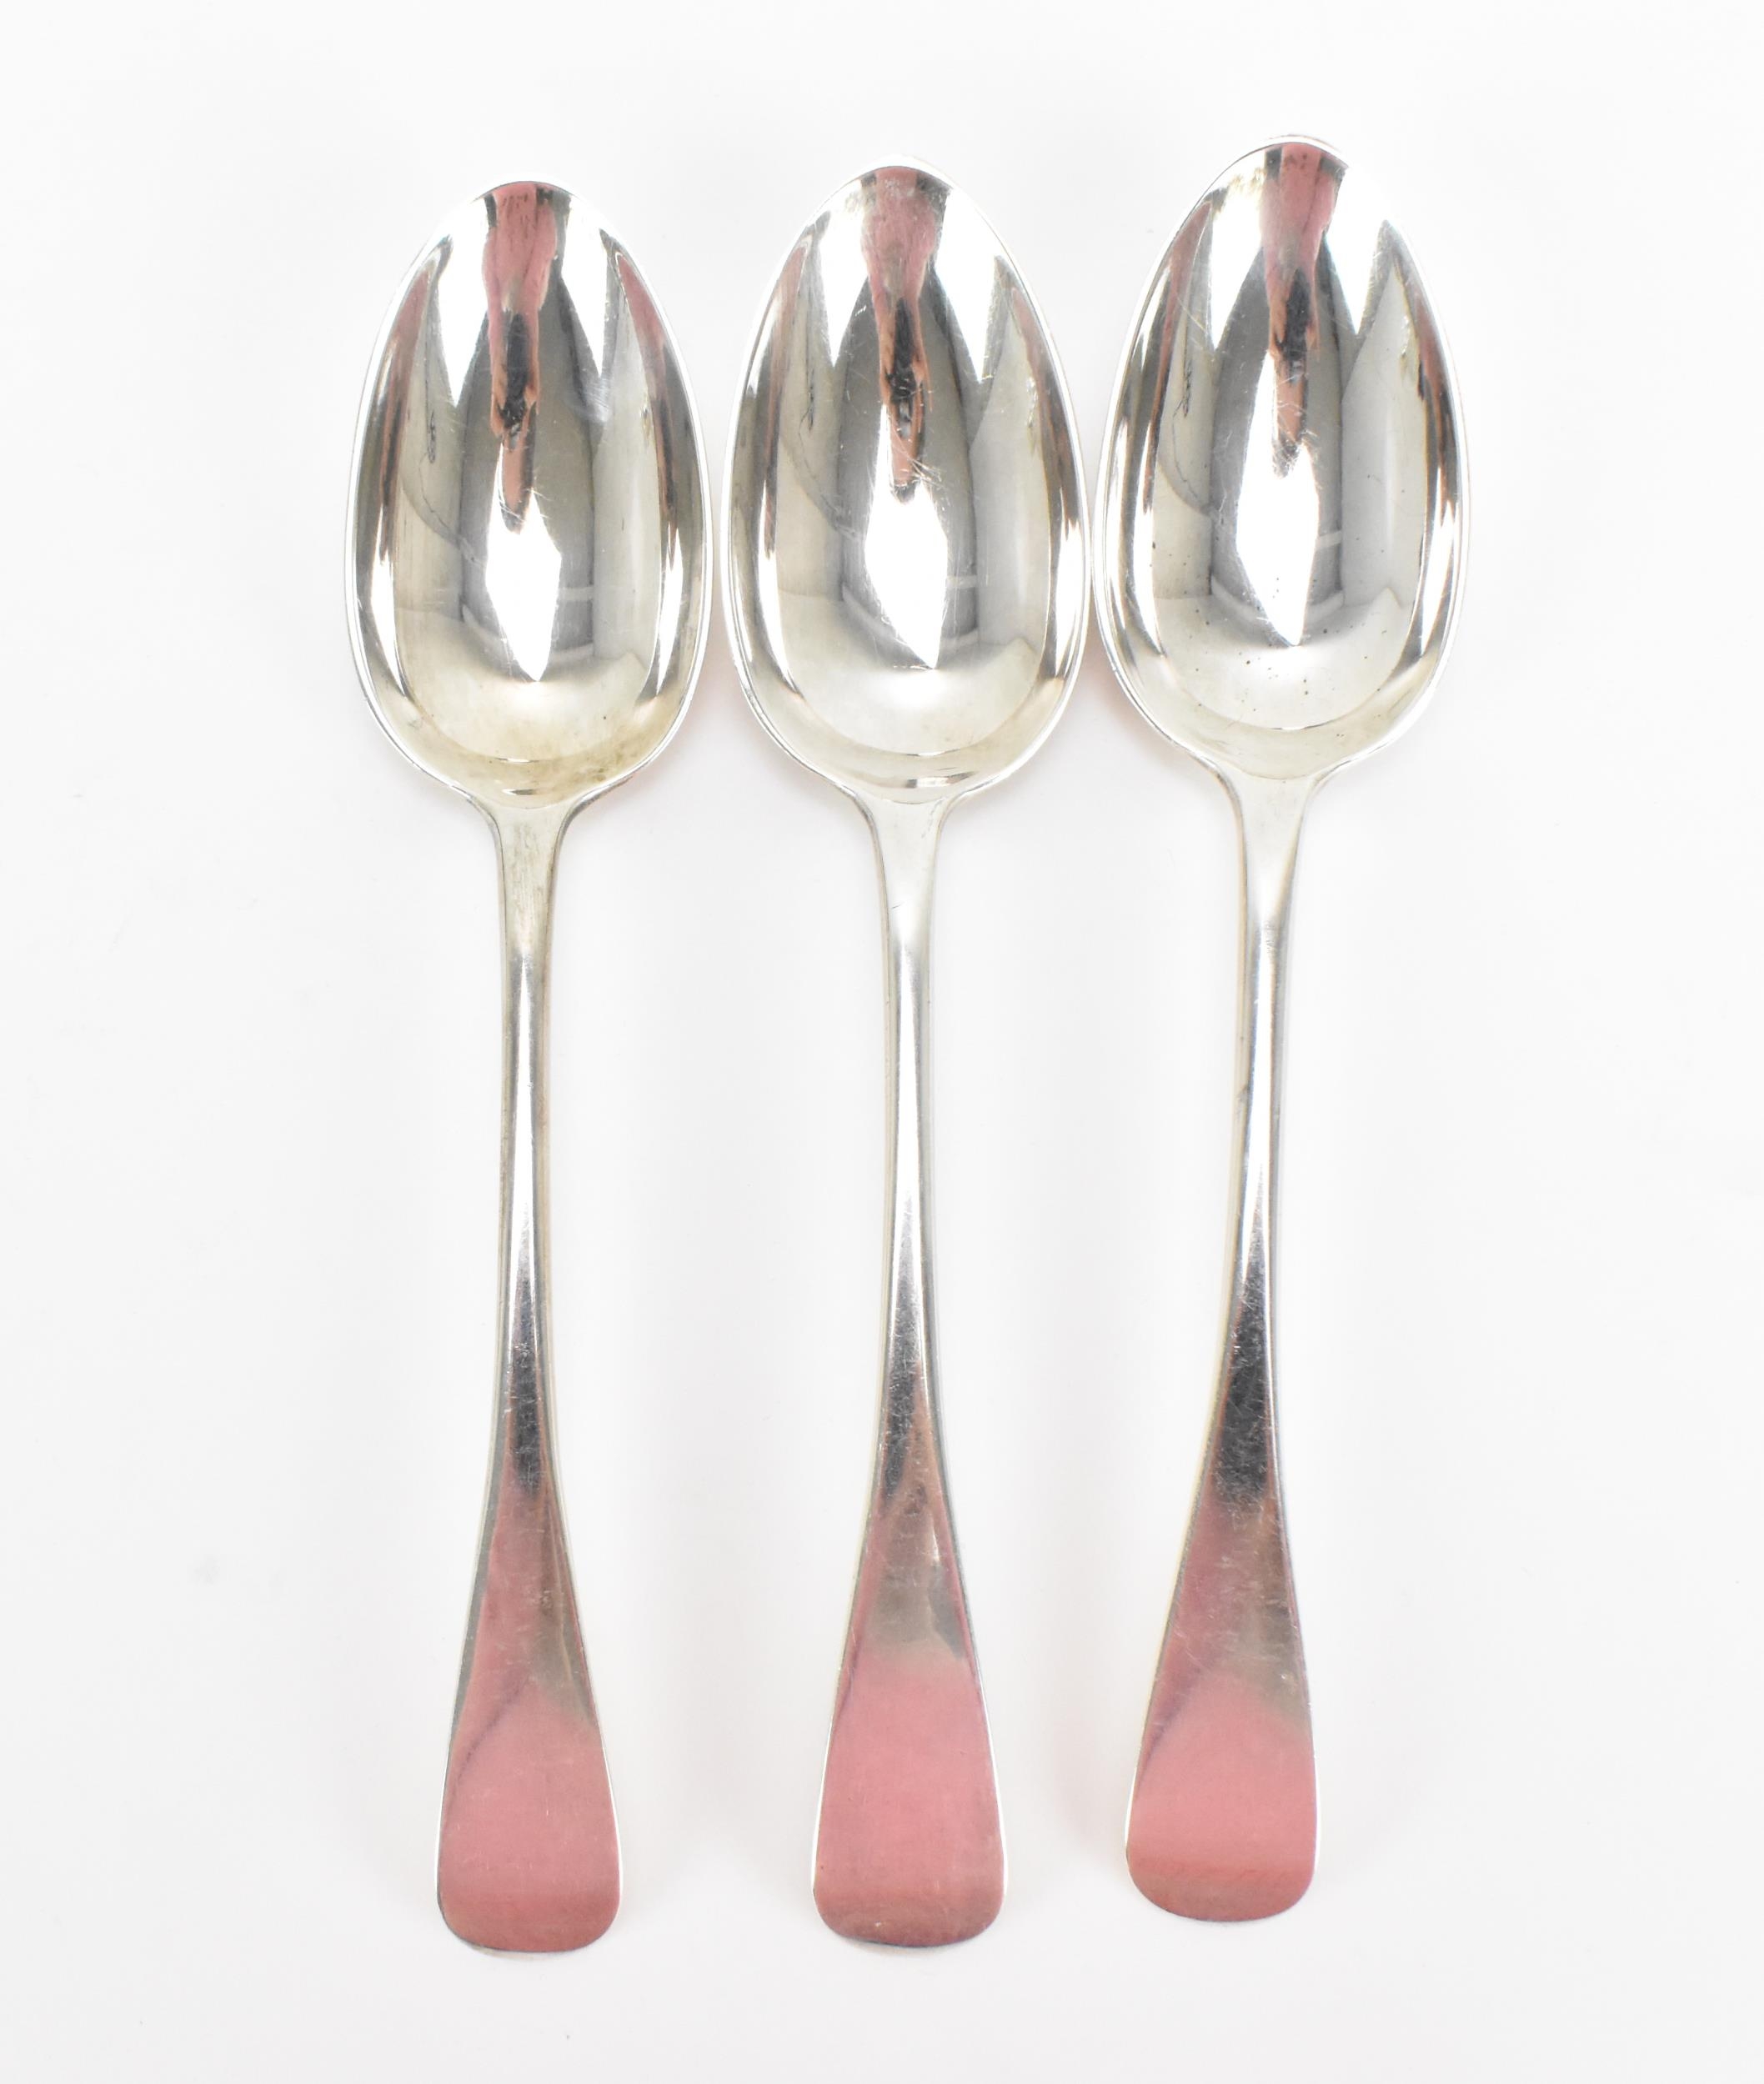 A set of three Victorian silver tablespoons by Samuel Whitford, London 1869, in the Old English